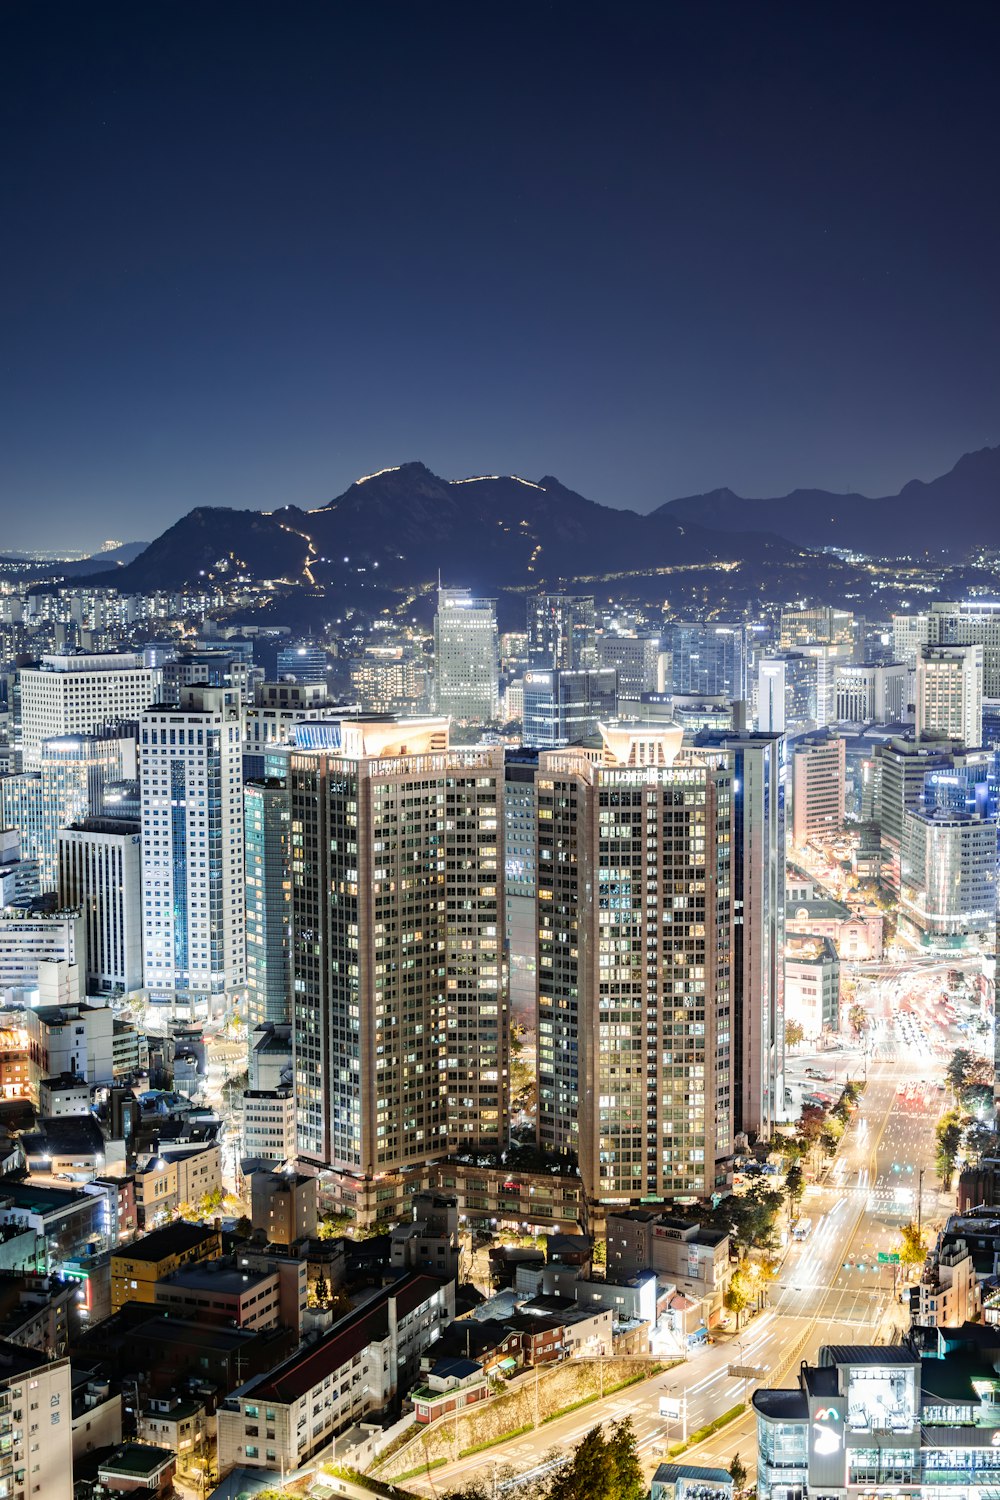 a city at night with tall buildings and mountains in the background